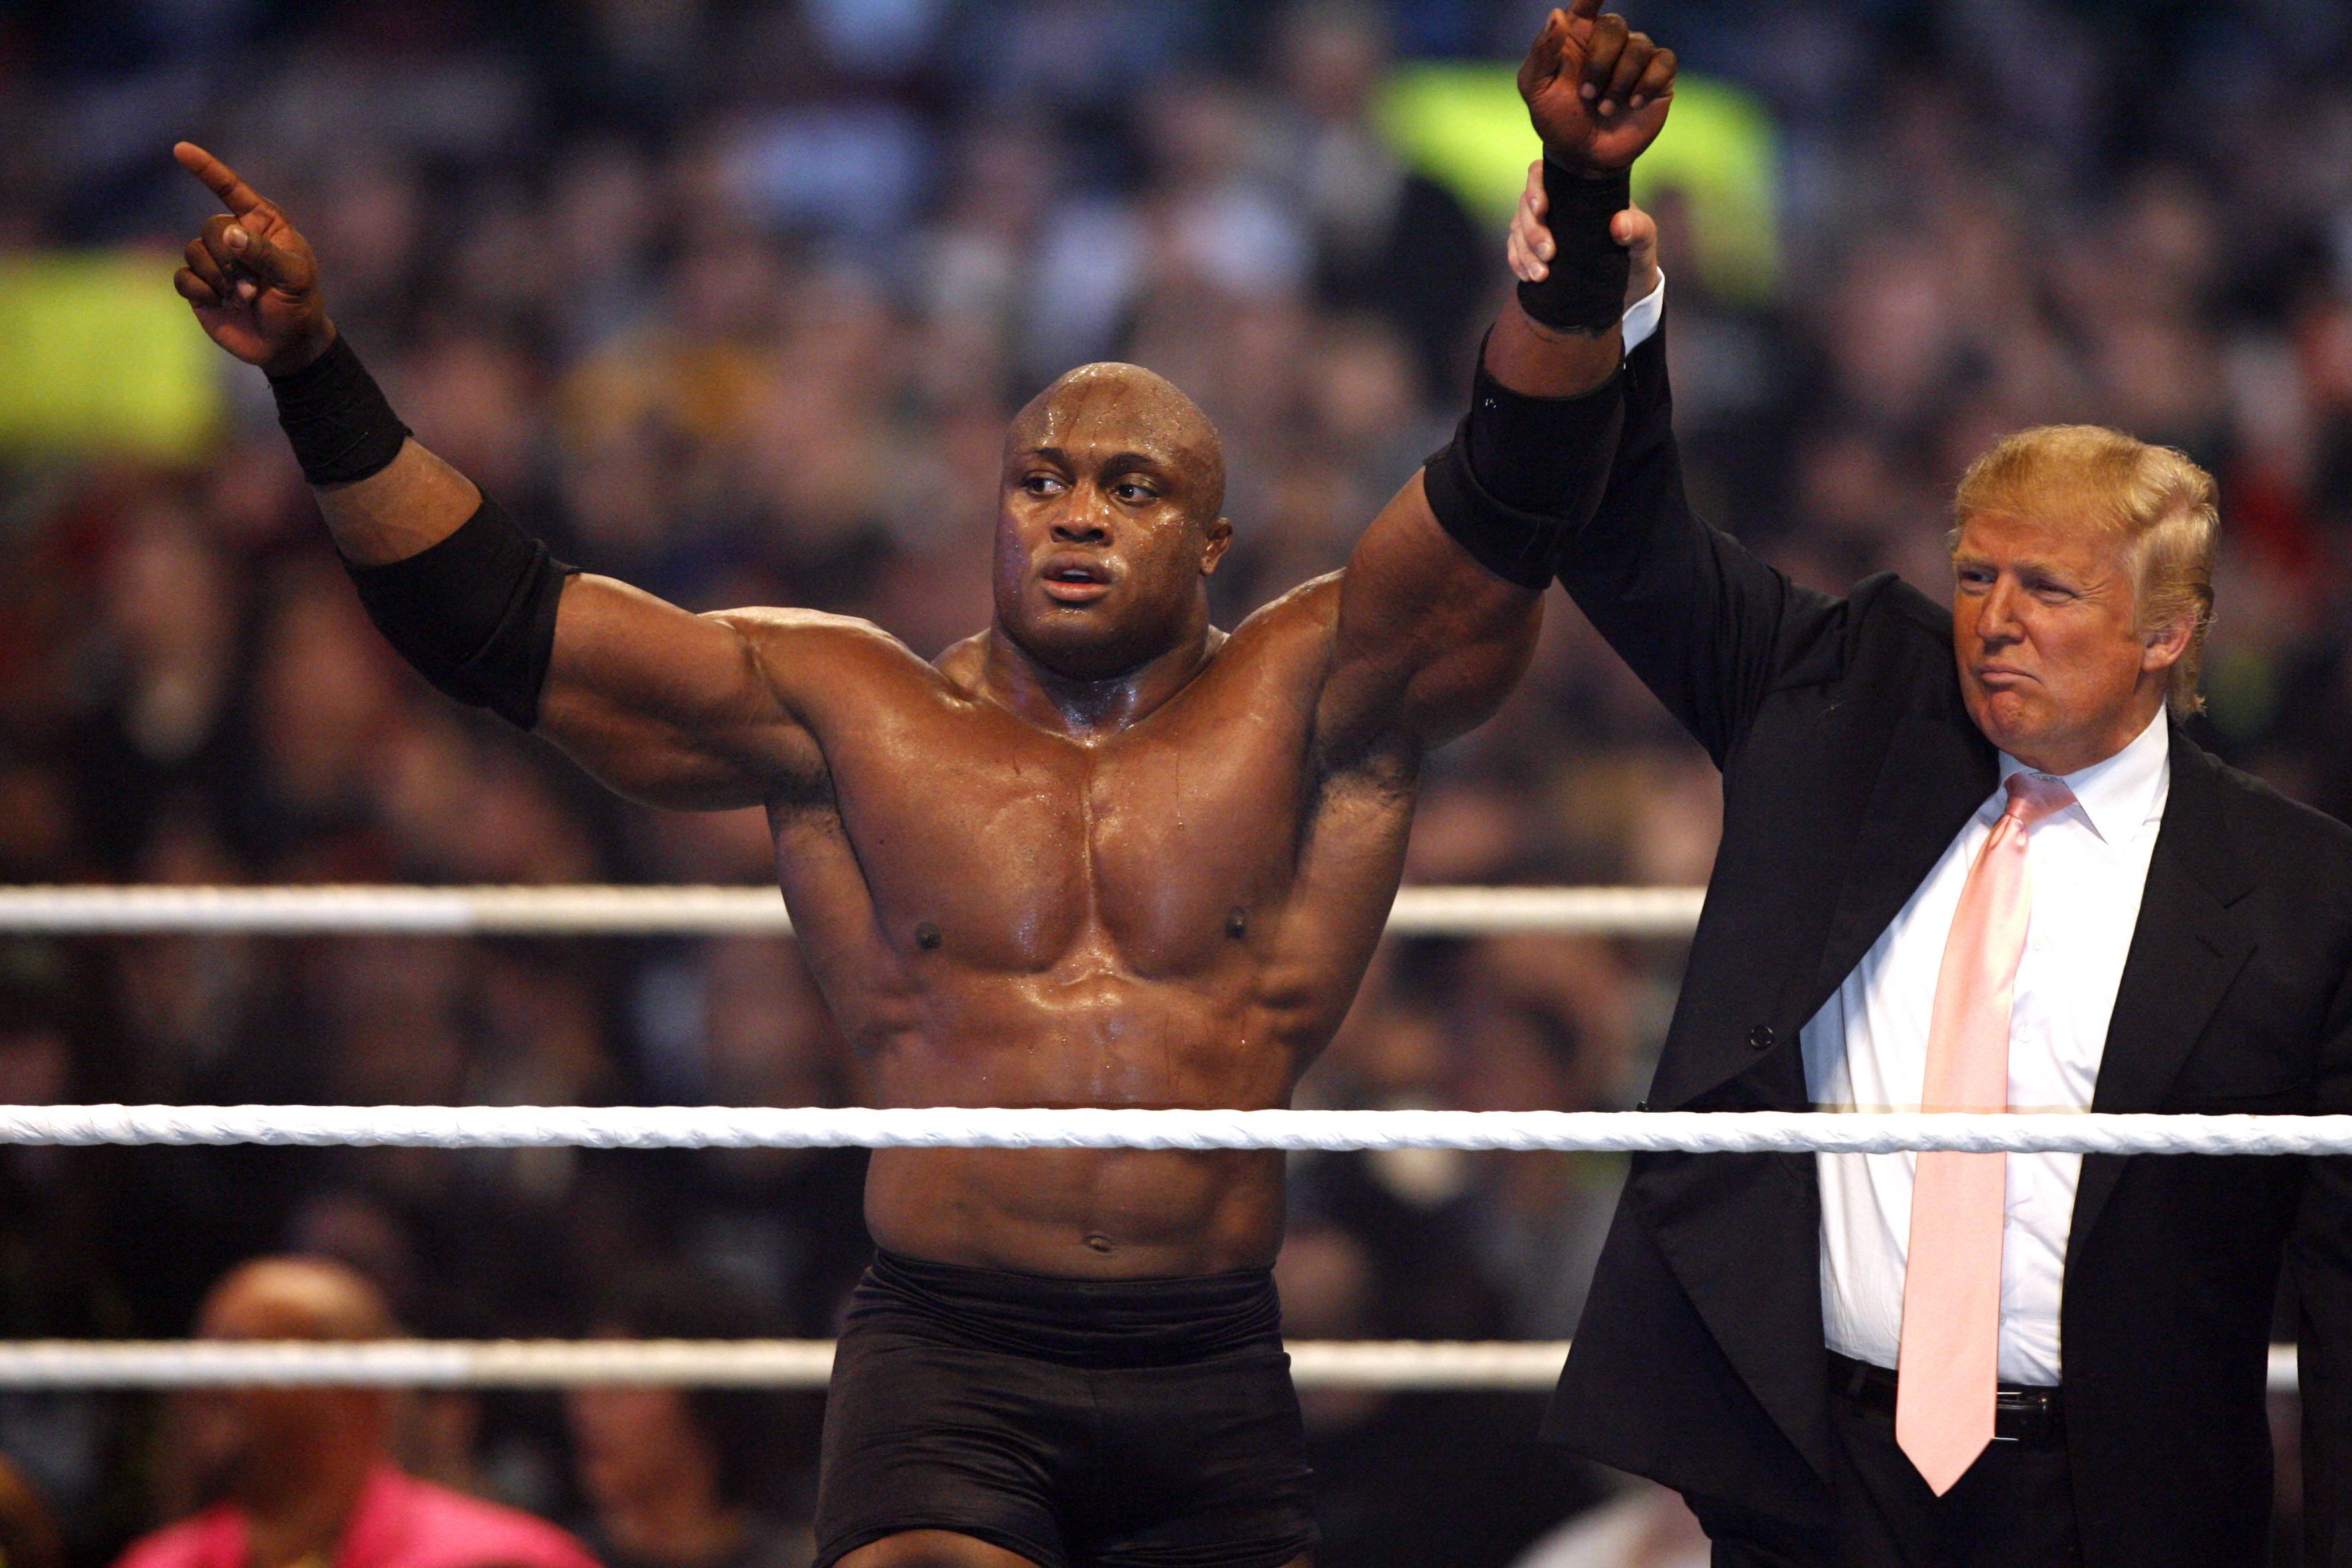 WWEs Bobby Lashley reflects on WrestleMania with Donald Trump pic